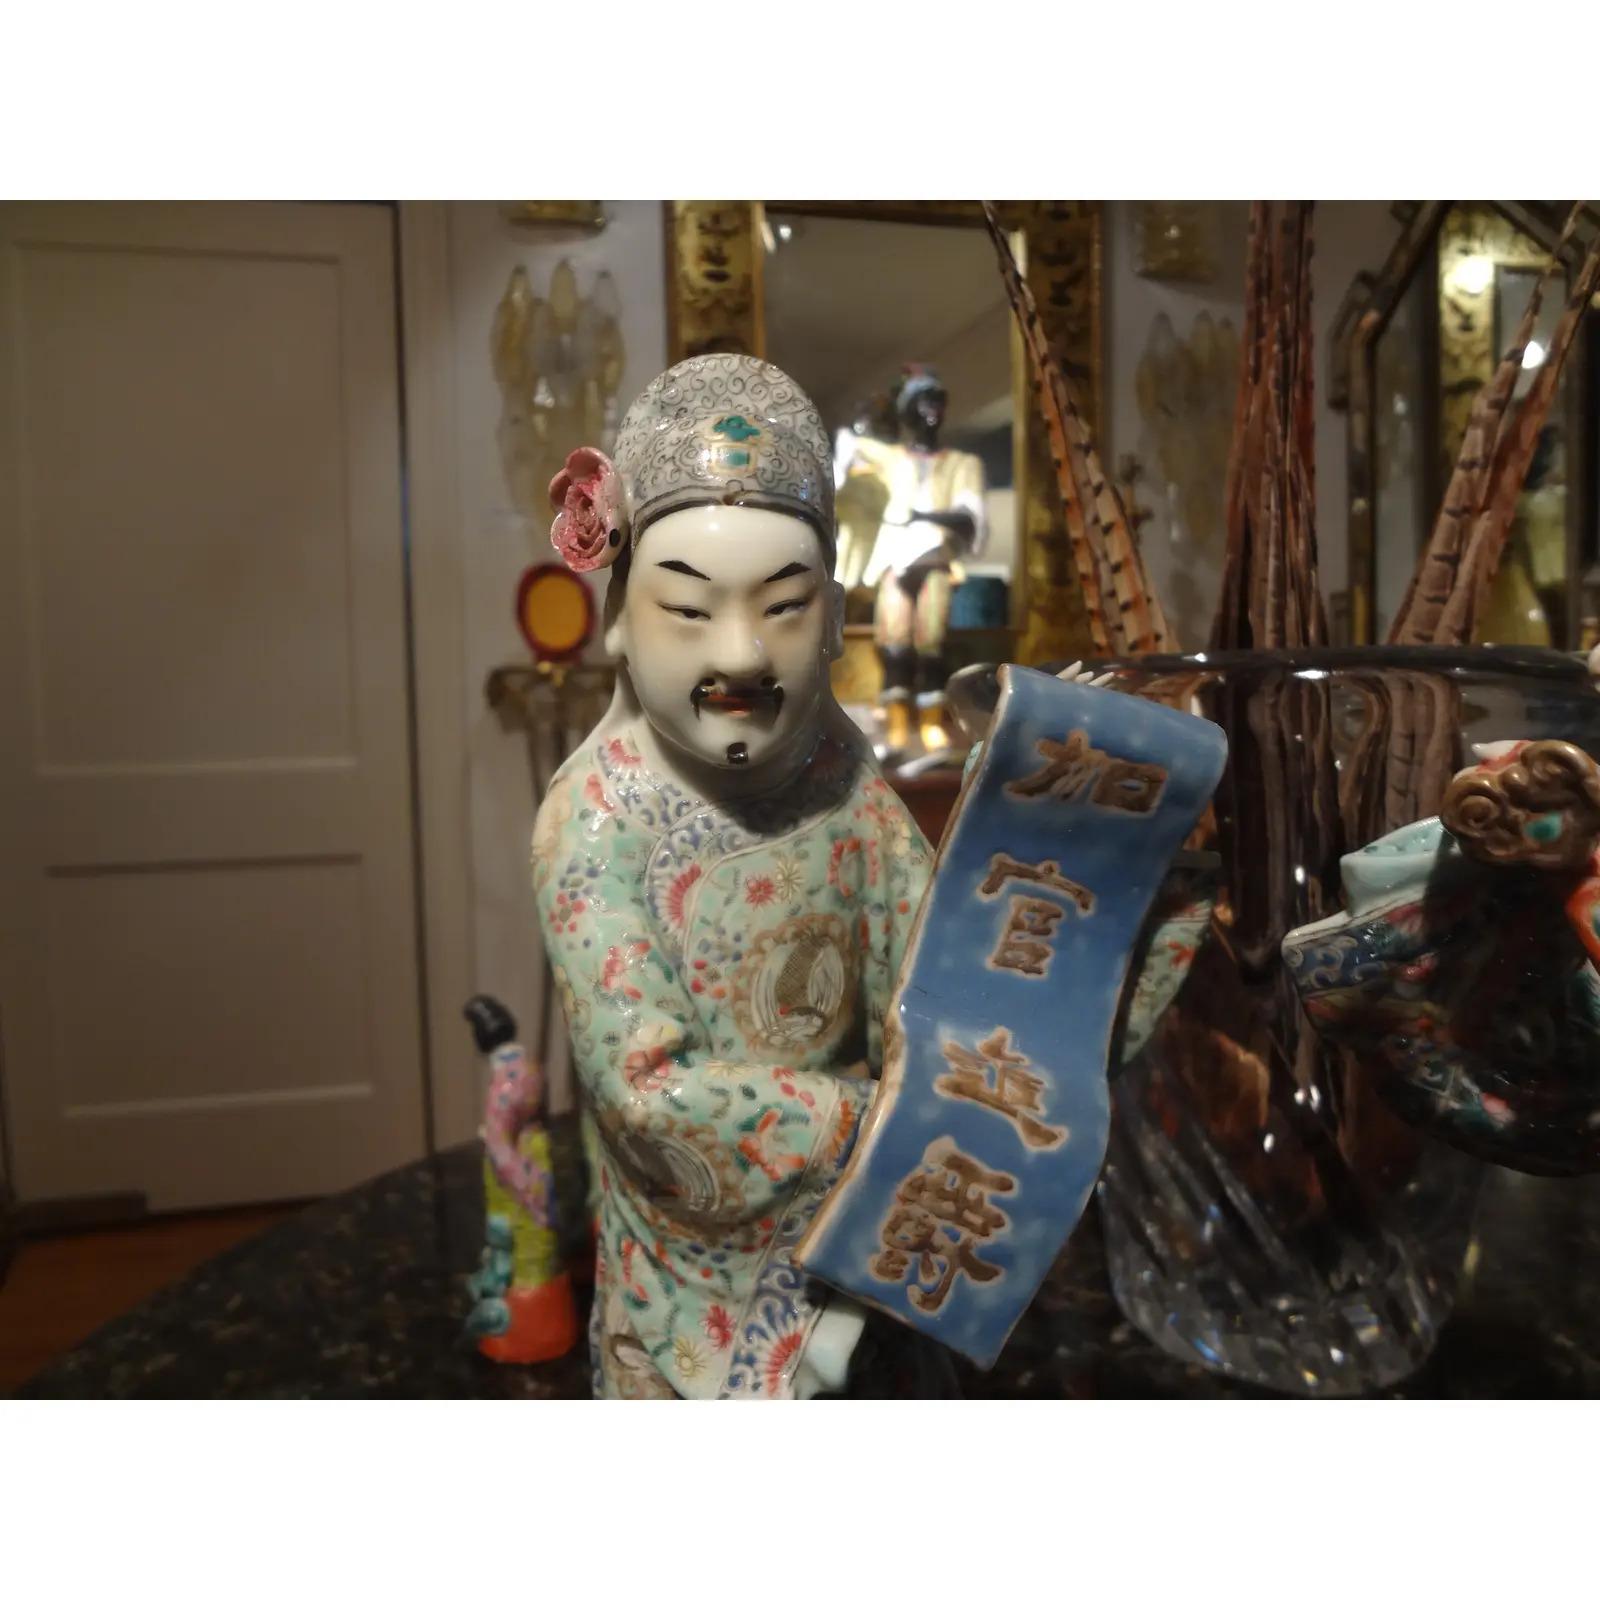 Pair of 19th century Chinese hand decorated porcelain scholar figures.
Stunning pair of well executed hand decorated Chinese porcelain figures or sculptures depicting scholars. These fabulous finely detailed figural Chinese statues are from the